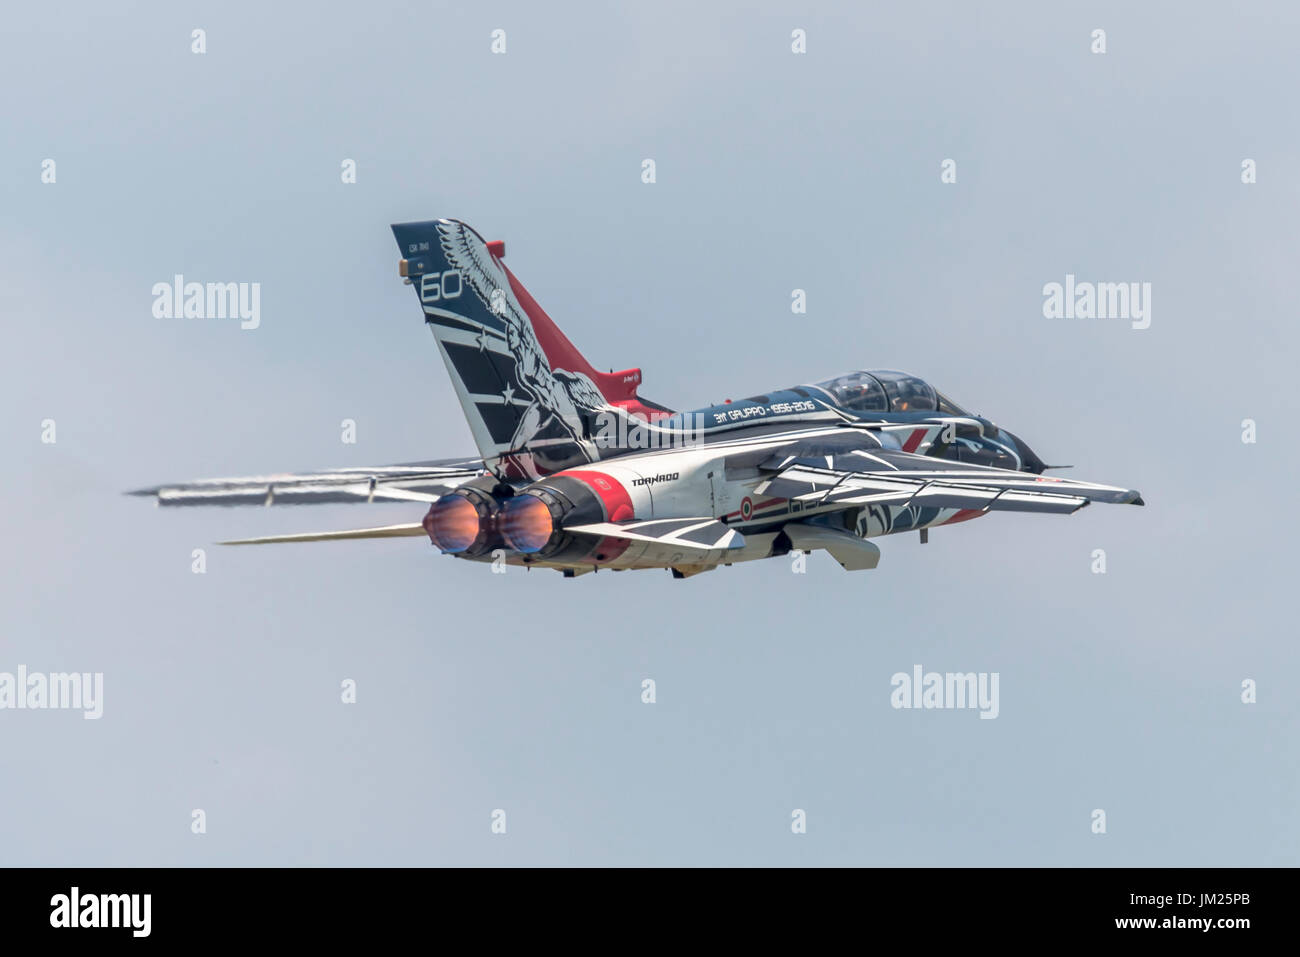 Panavia Tornado PA-2000 took off from Turin to Fairford for The Royal International Air Tattoo in United Kingdom. Winner for Tornado with best livery. Stock Photo